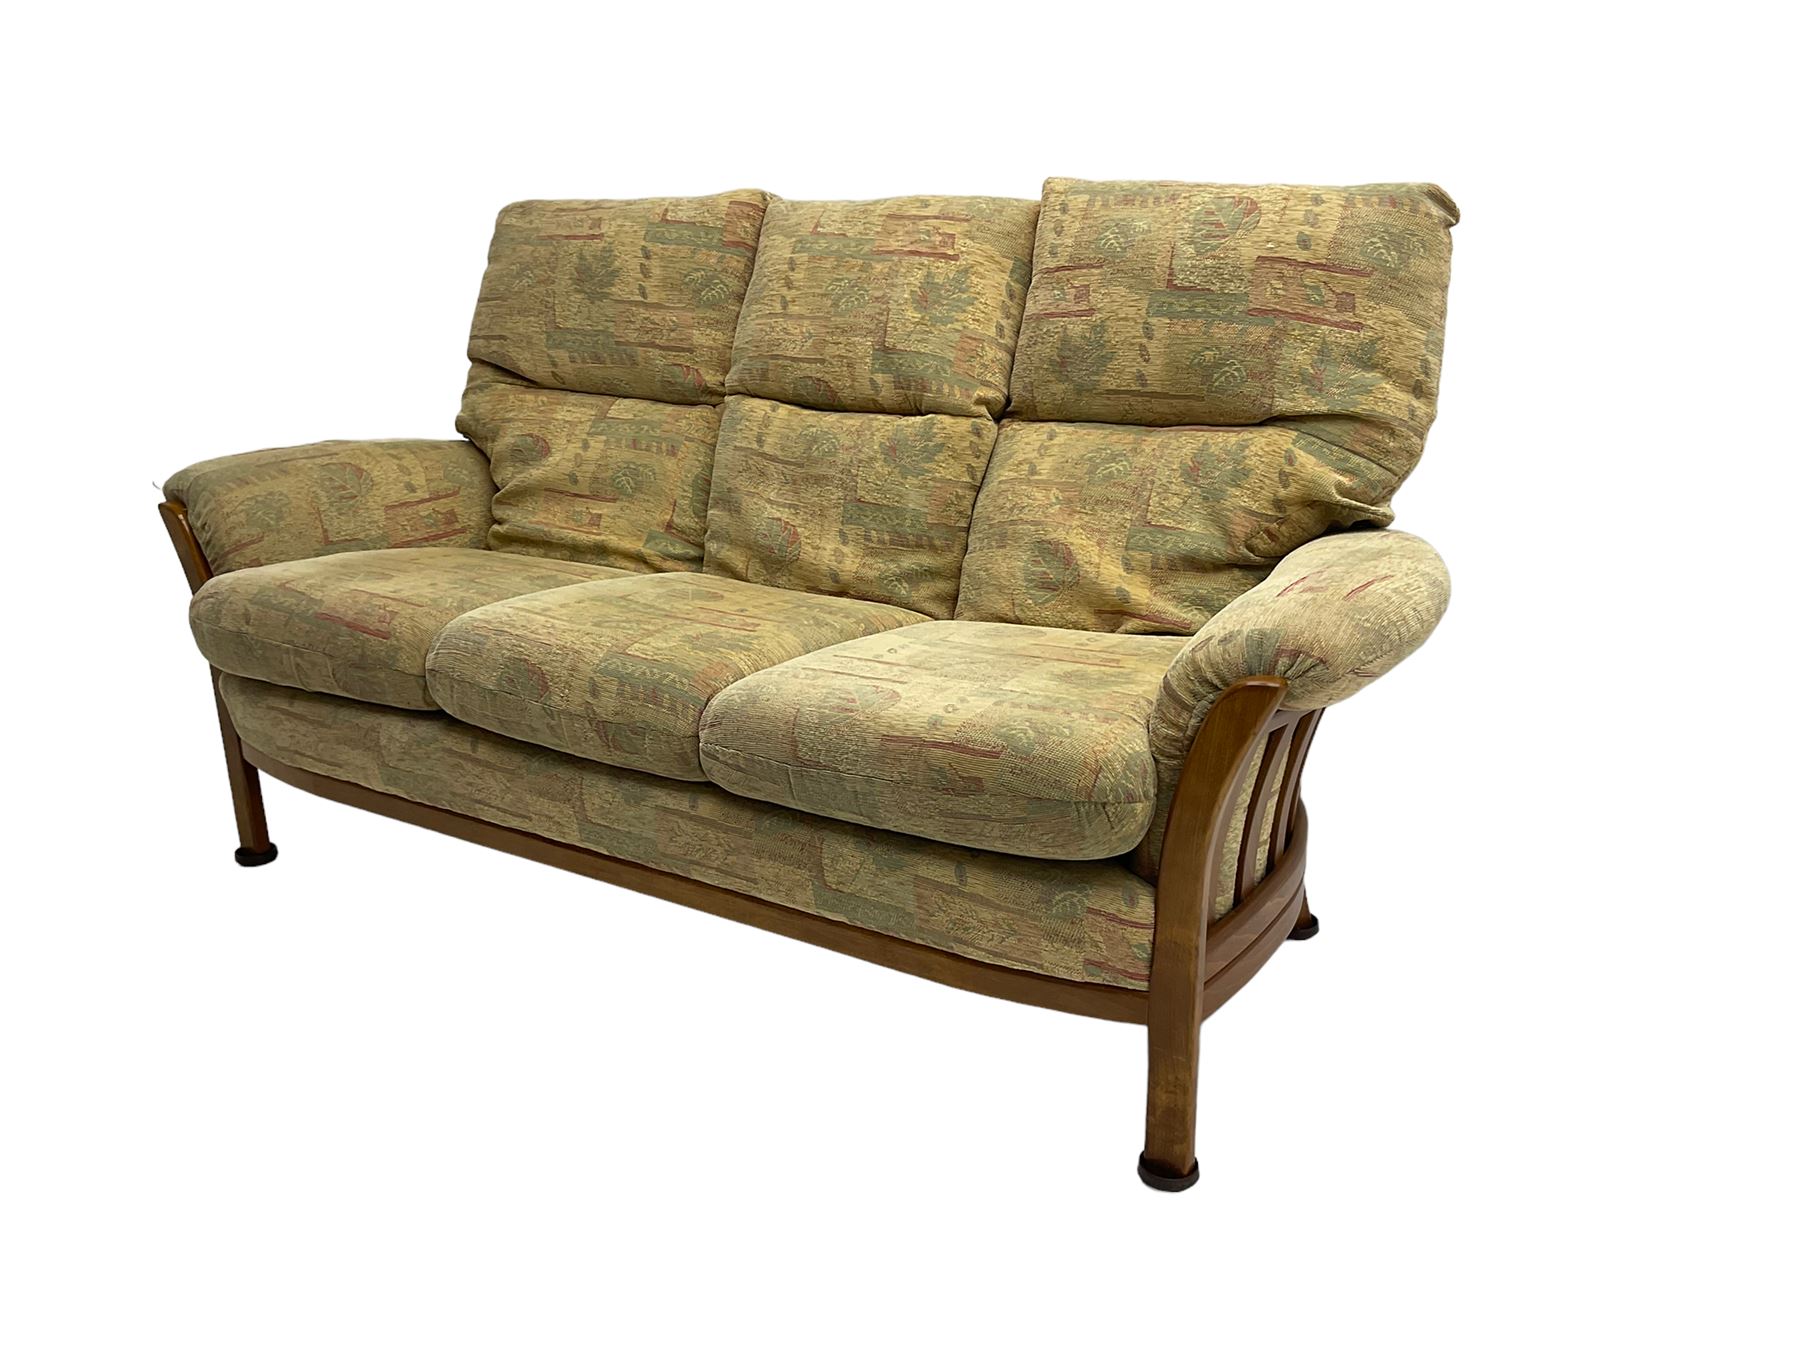 Mid-20th century beech framed three seat sofa (W1180cm) and pair of matching armchairs (W95cm) uphol - Image 13 of 15